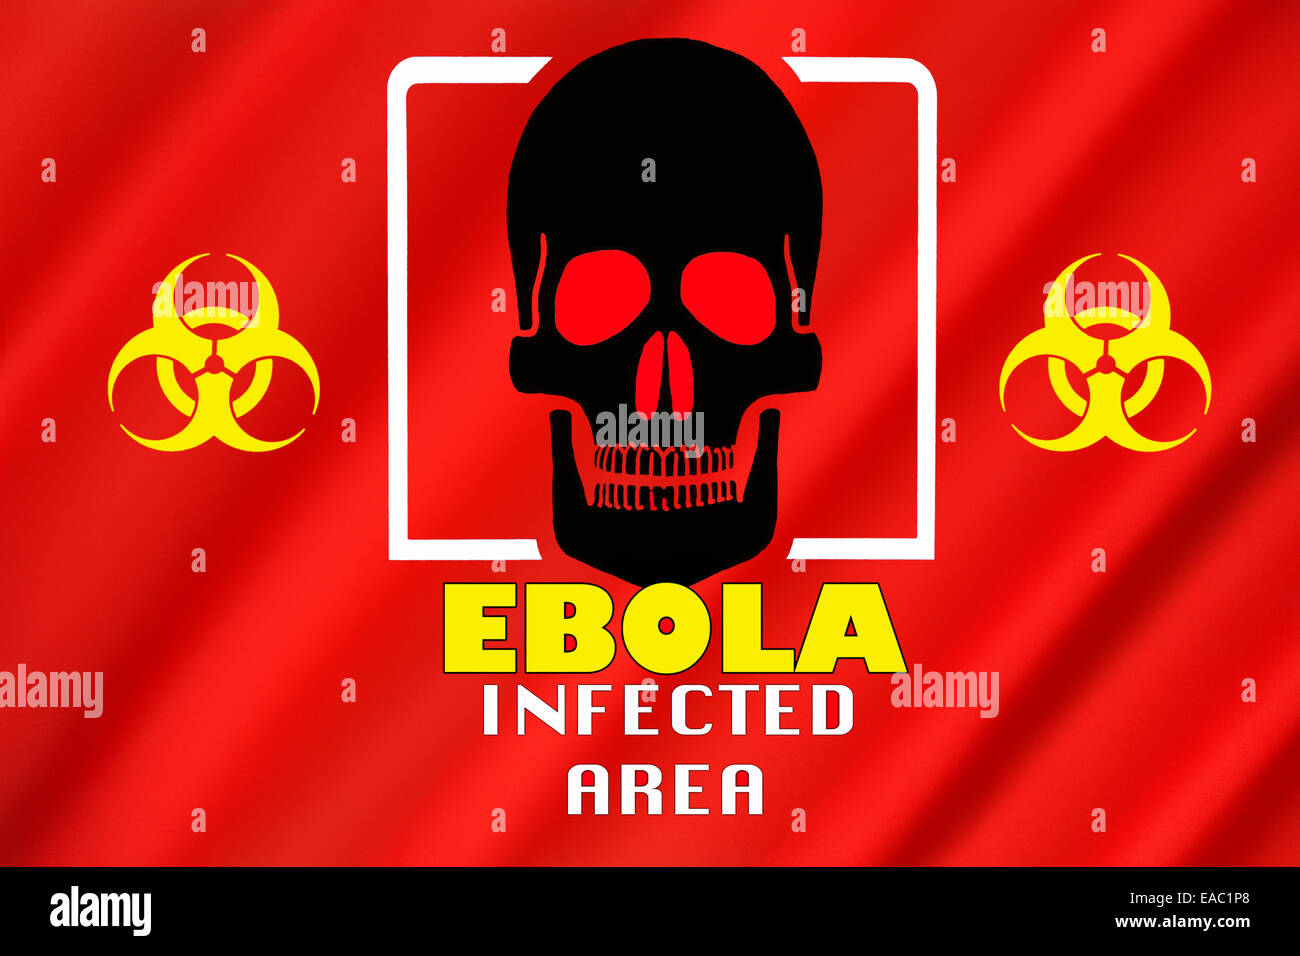 Warning Flag - Ebola Outbreak - Infected Area.  Biohazard warning of an Ebola infected area. Stock Photo